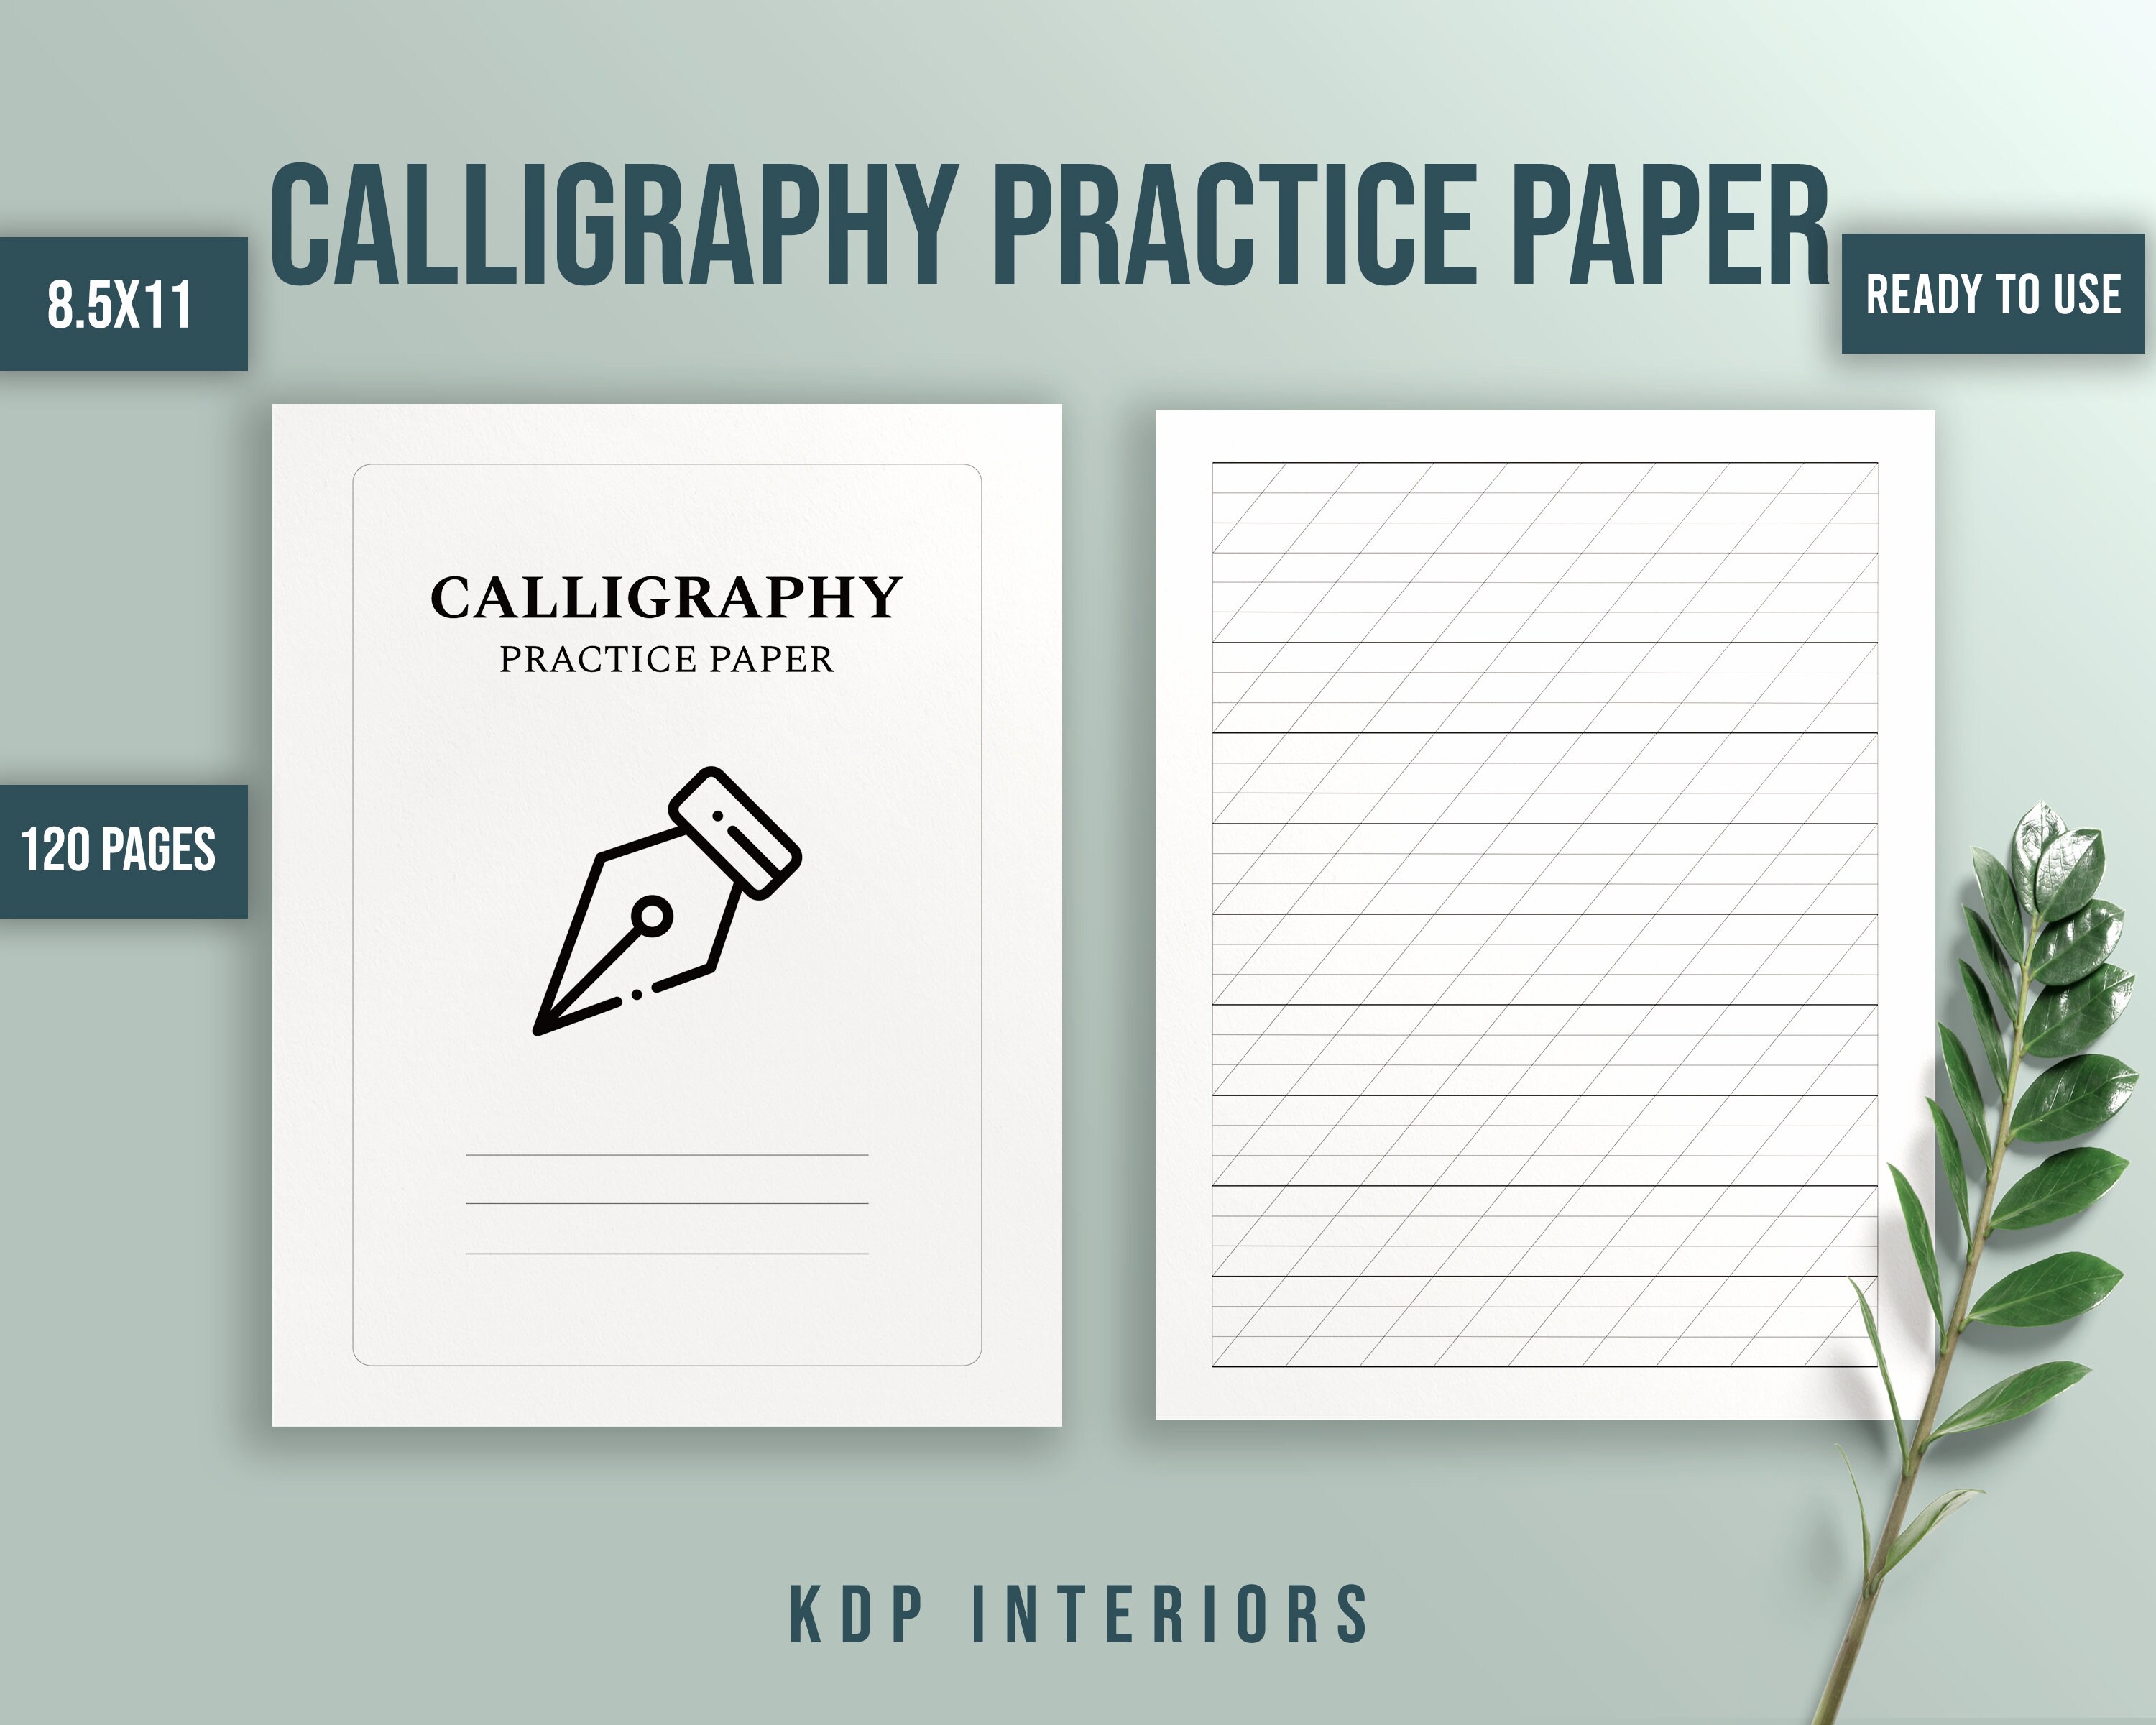 How to create Calligraphy Practice Paper (8 5 x 11 inches) with powerpoint  